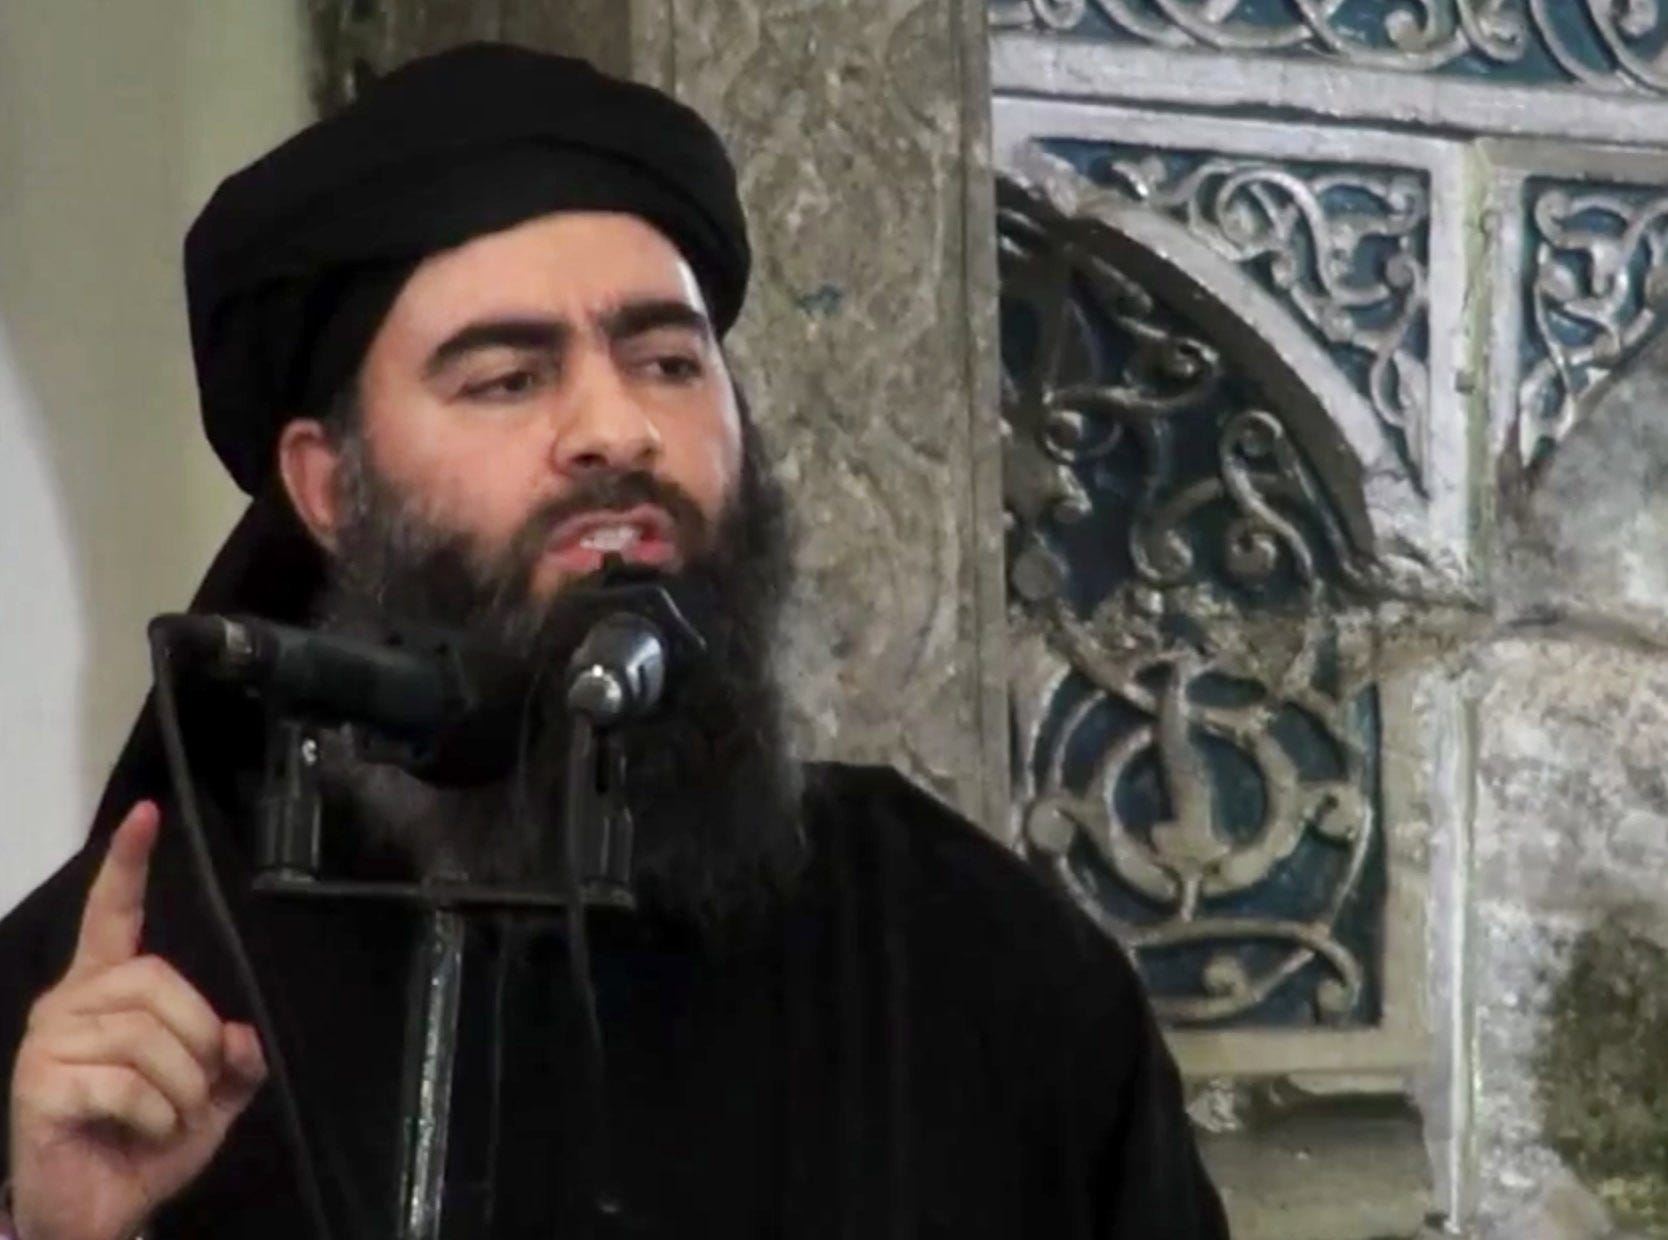 It's official: Our enemy is the Islamic State of Iraq and Syria, or ISIS